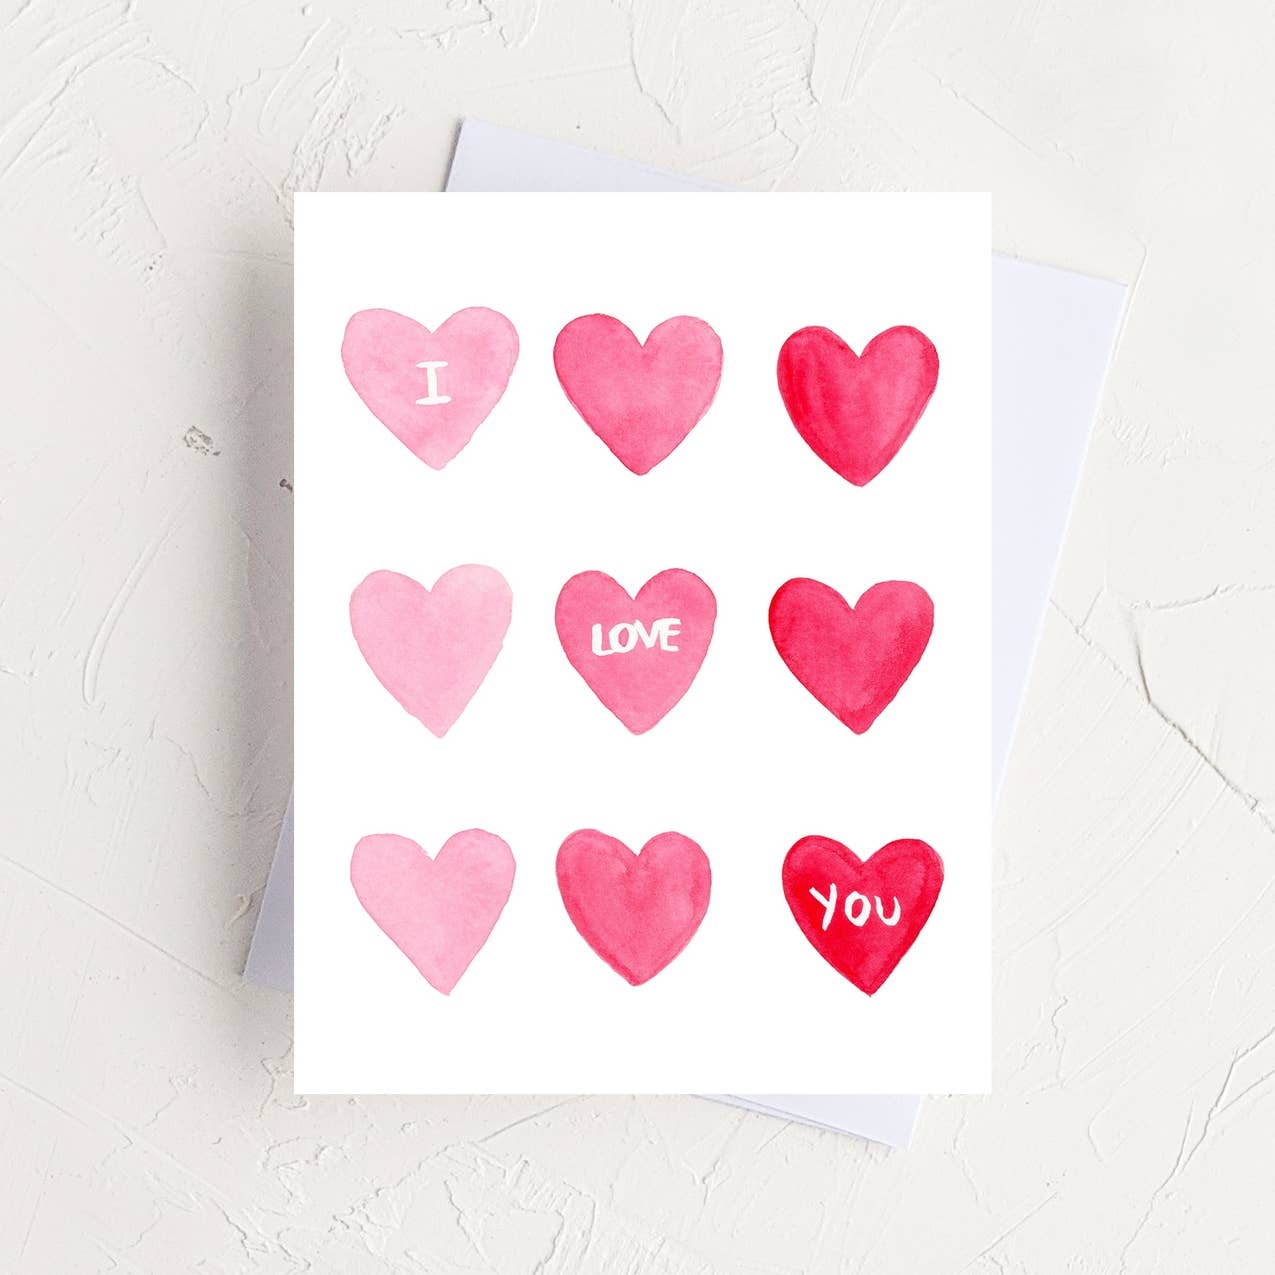 Almeida Illustrations - Love you Pink Hearts - Valentine's Day & Love Greeting Card